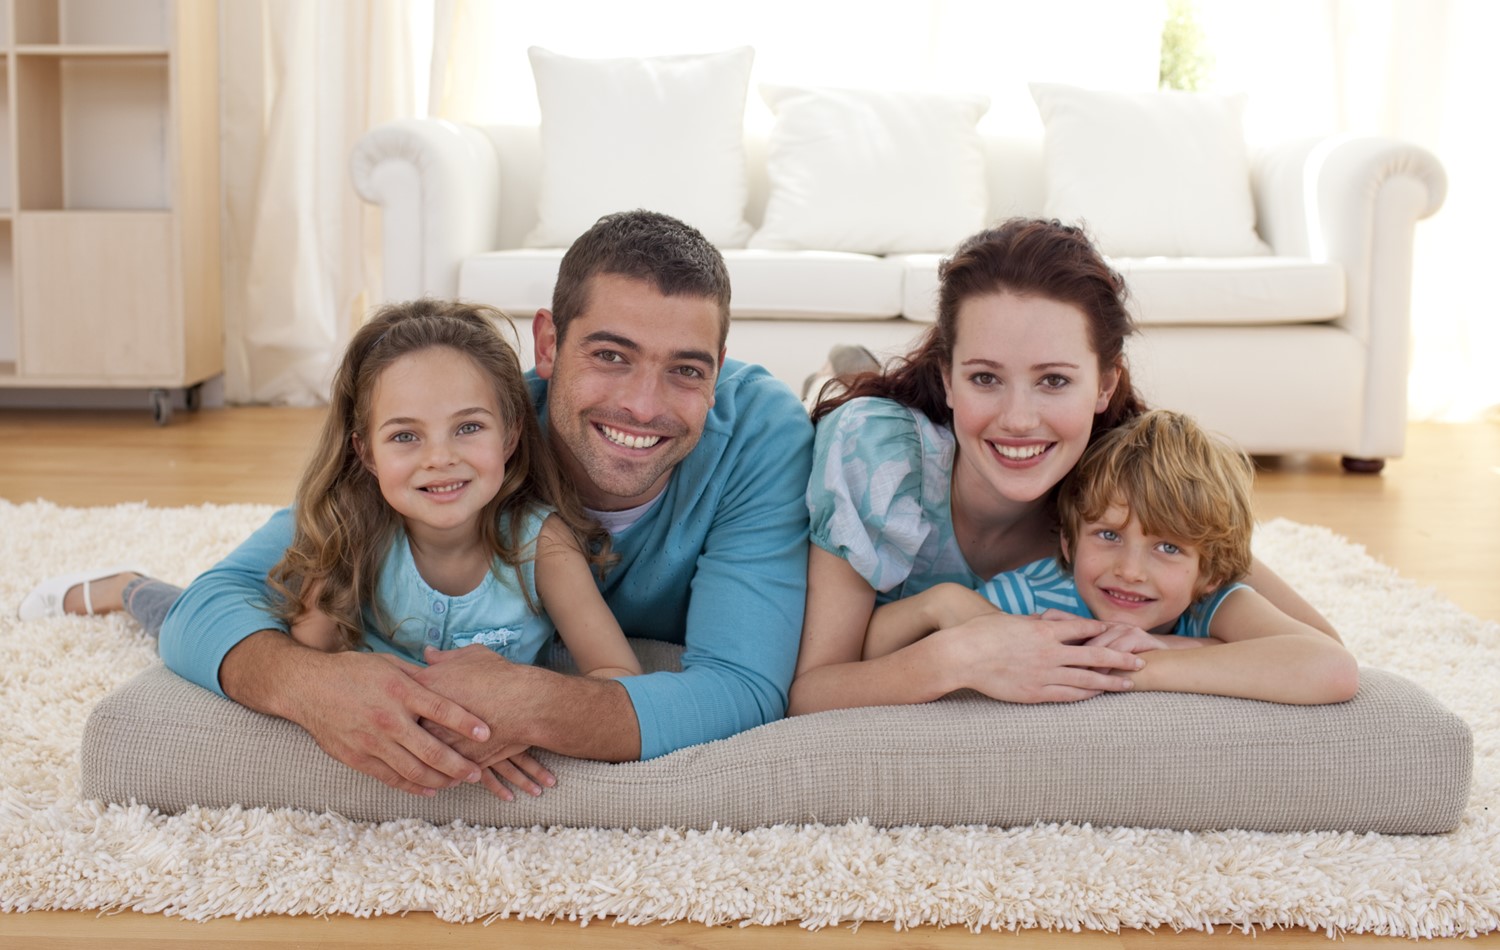 A Smiling Daughter, Dad, Mom, and Son Lay on a Cushion on a Beige Shag Carpet in Front of a Couch